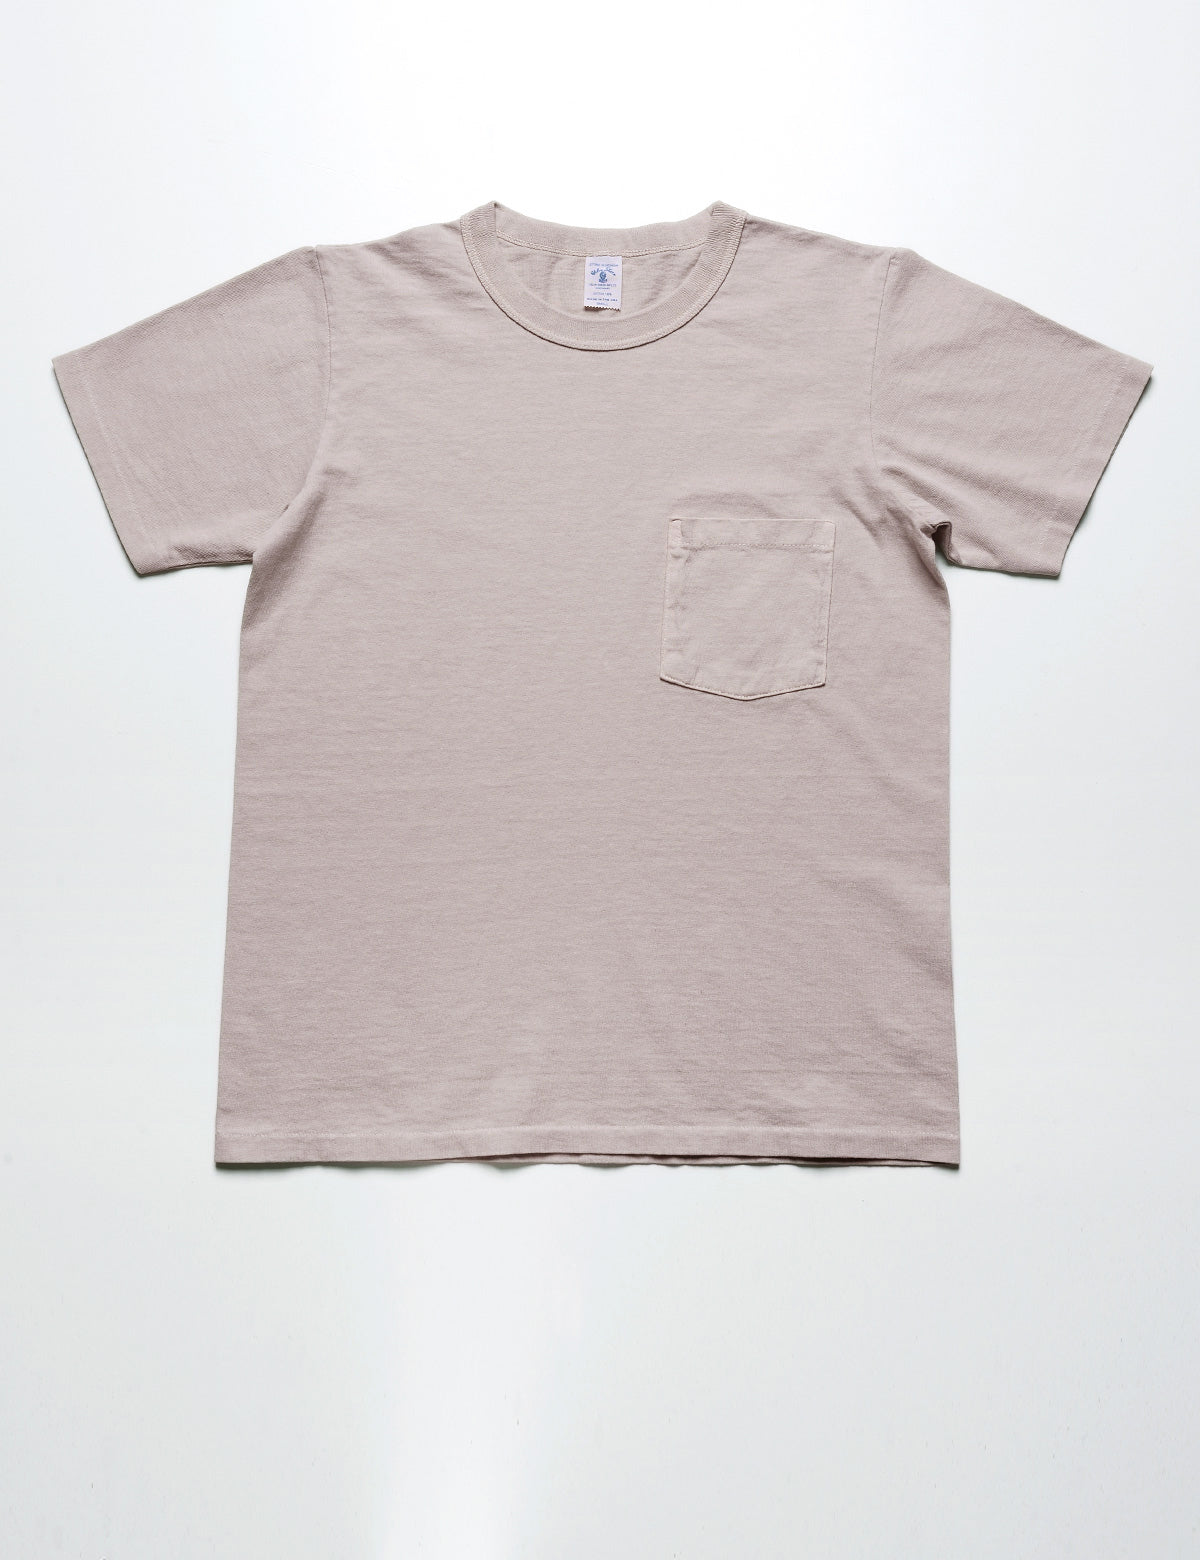 FINAL SALE: Pigment Pocket Tee in Wisteria